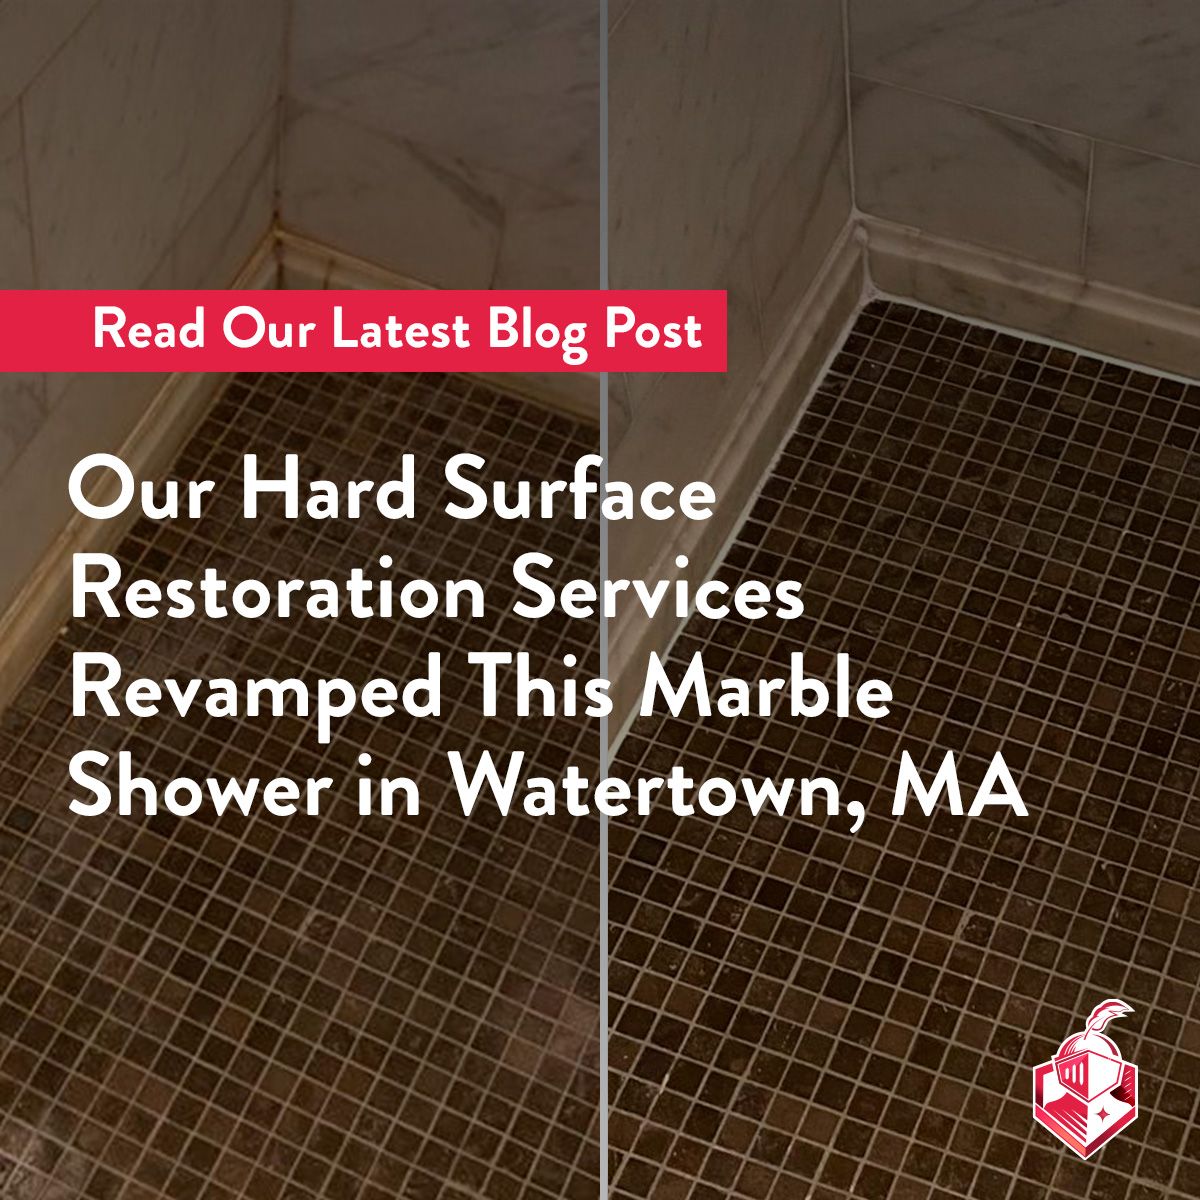 Our Hard Surface Restoration Services Revamped This Marble Shower in Watertown, MA